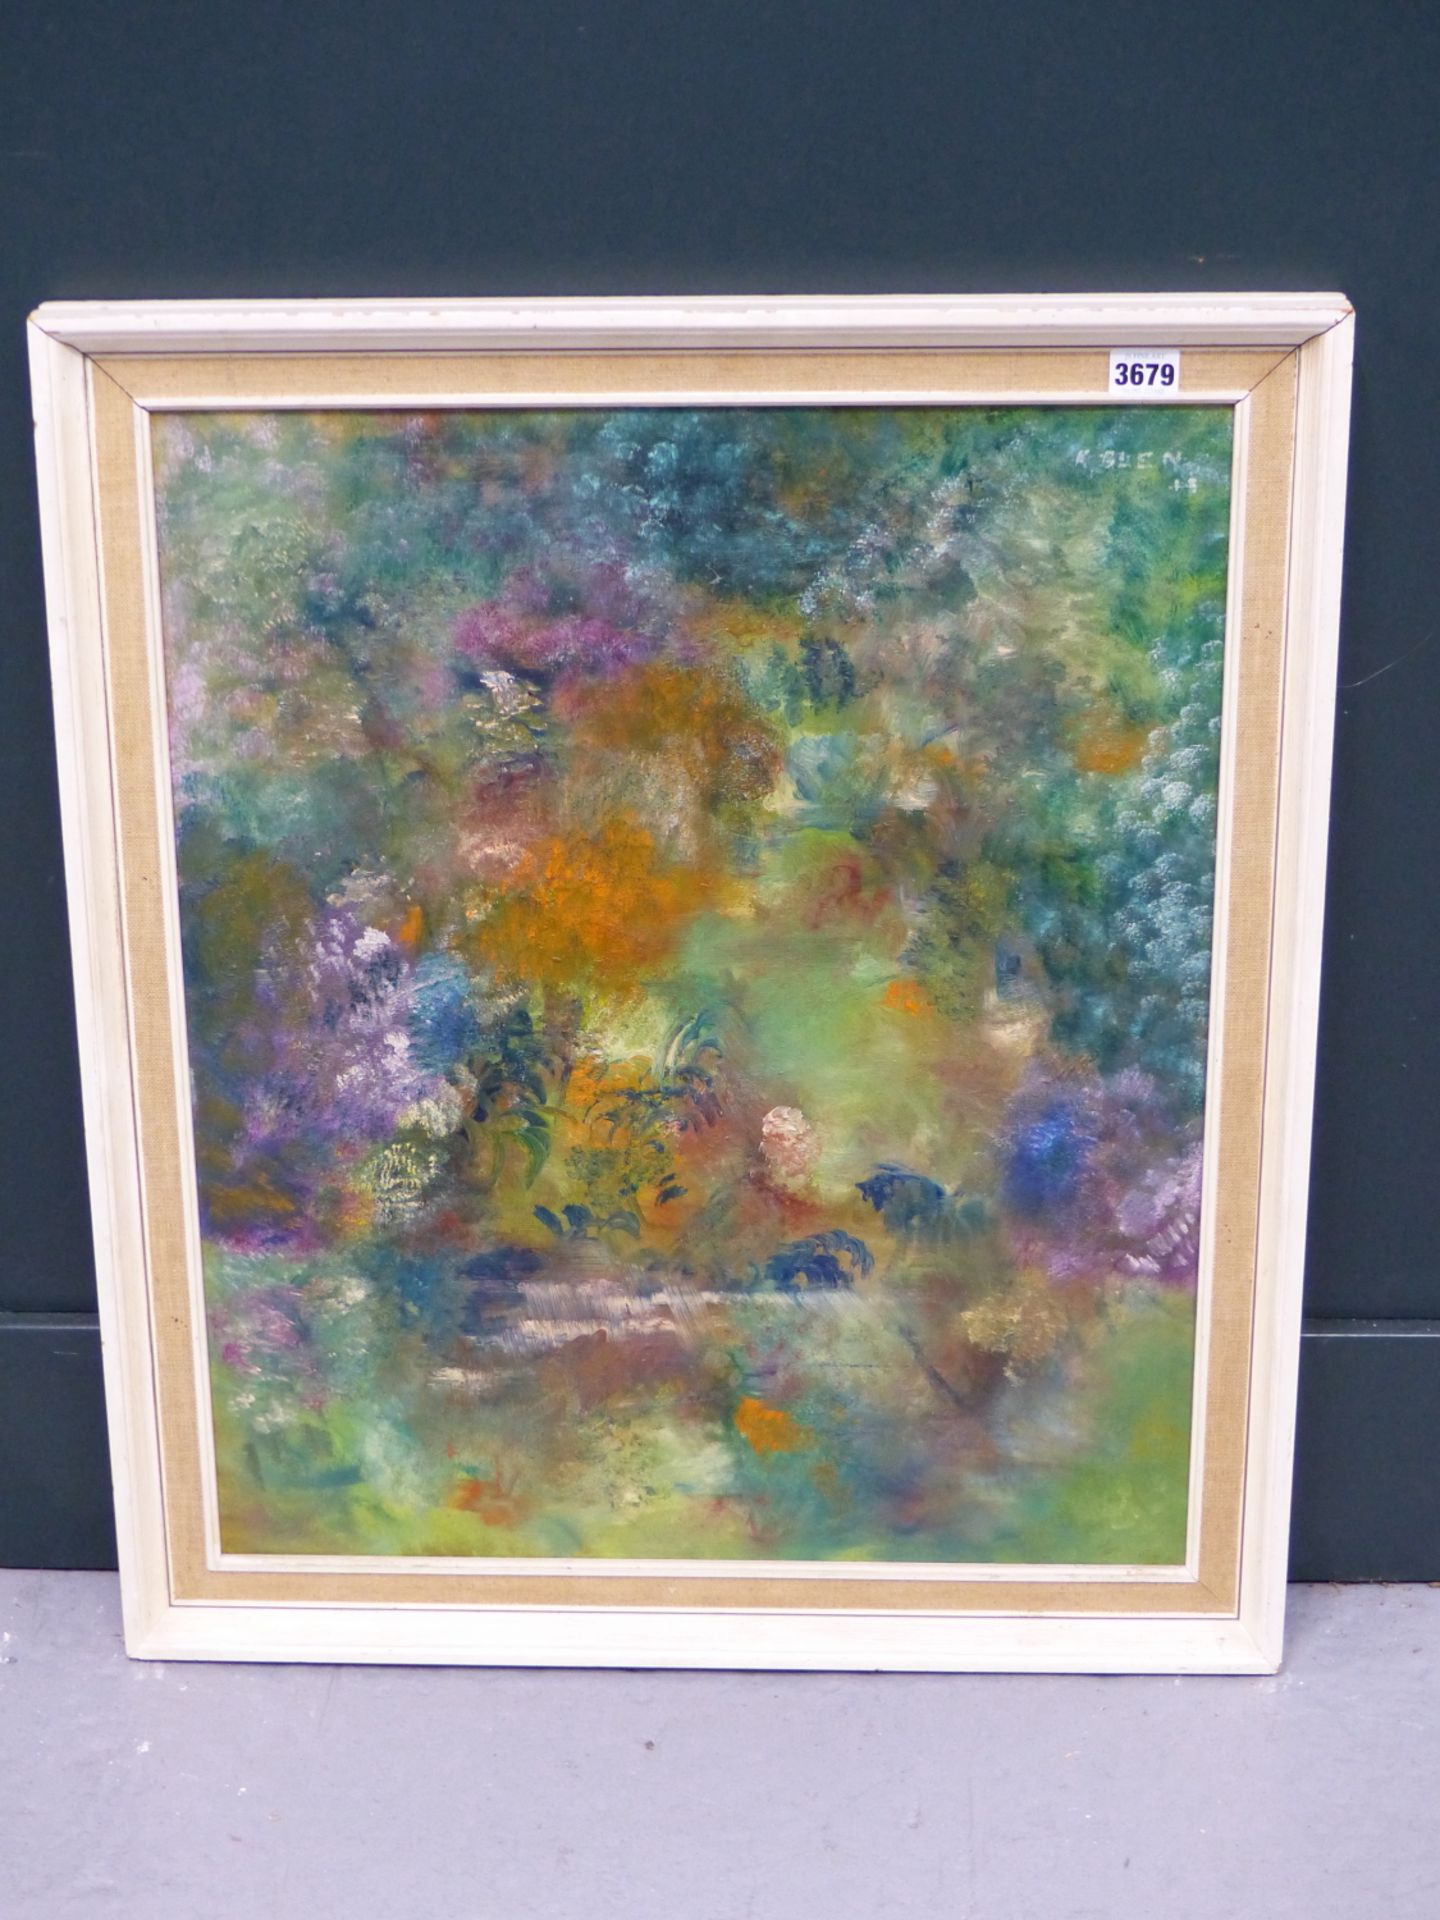 K. GLENISTER. (20TH CENTURY) - HIDDEN WATERS- IMPRESSIONIST, OIL ON BOARD. SIGNED AND DATED '45. U/ - Image 3 of 6